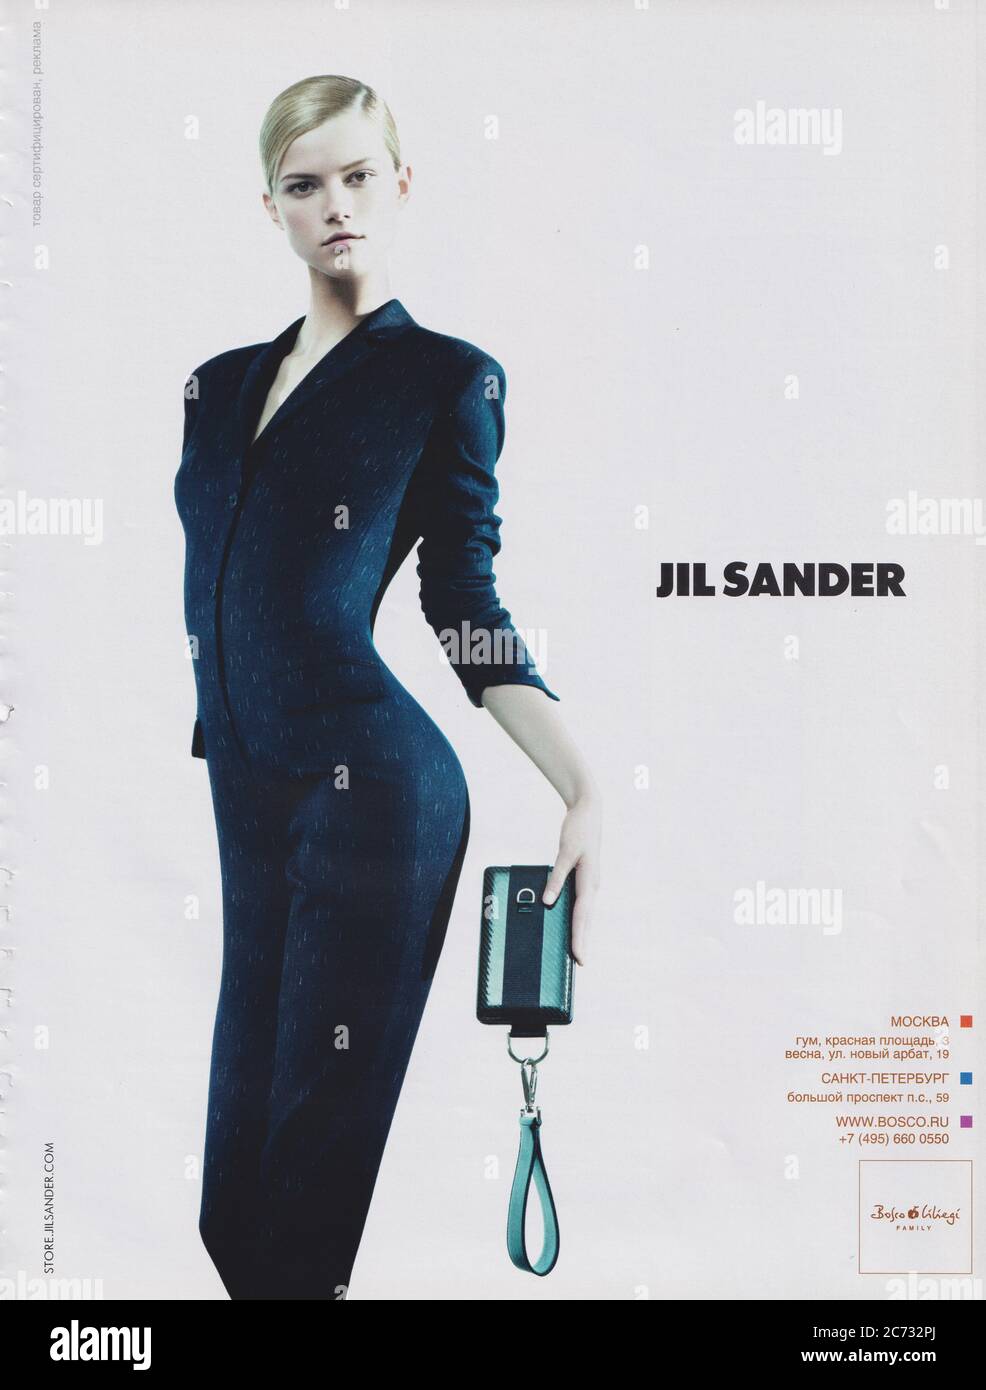 Jil sander campaign hi-res stock photography and images - Alamy